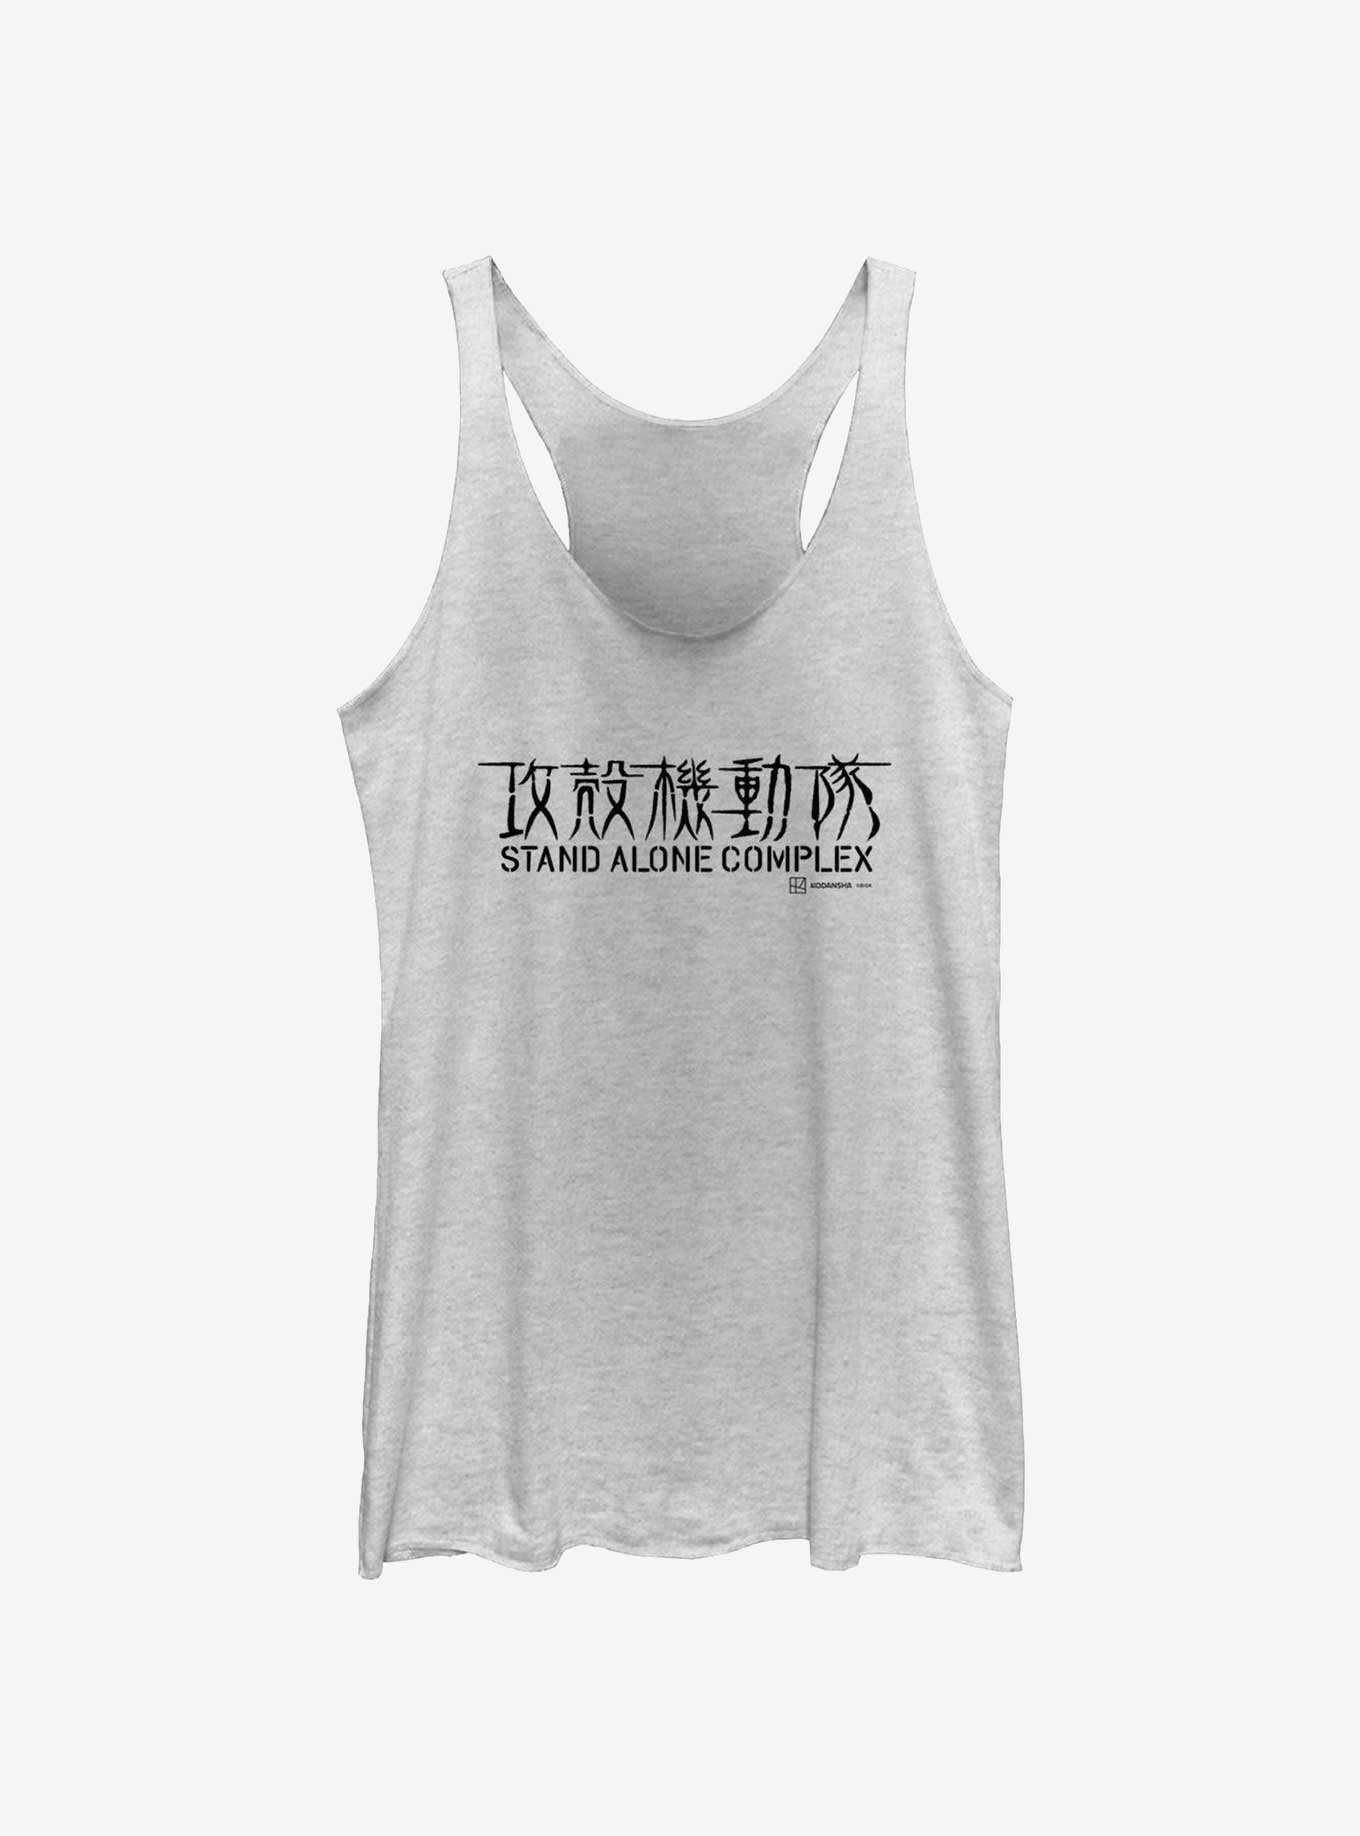 Ghost in the Shell Stand Alone Complex Logo Girls Tank, , hi-res